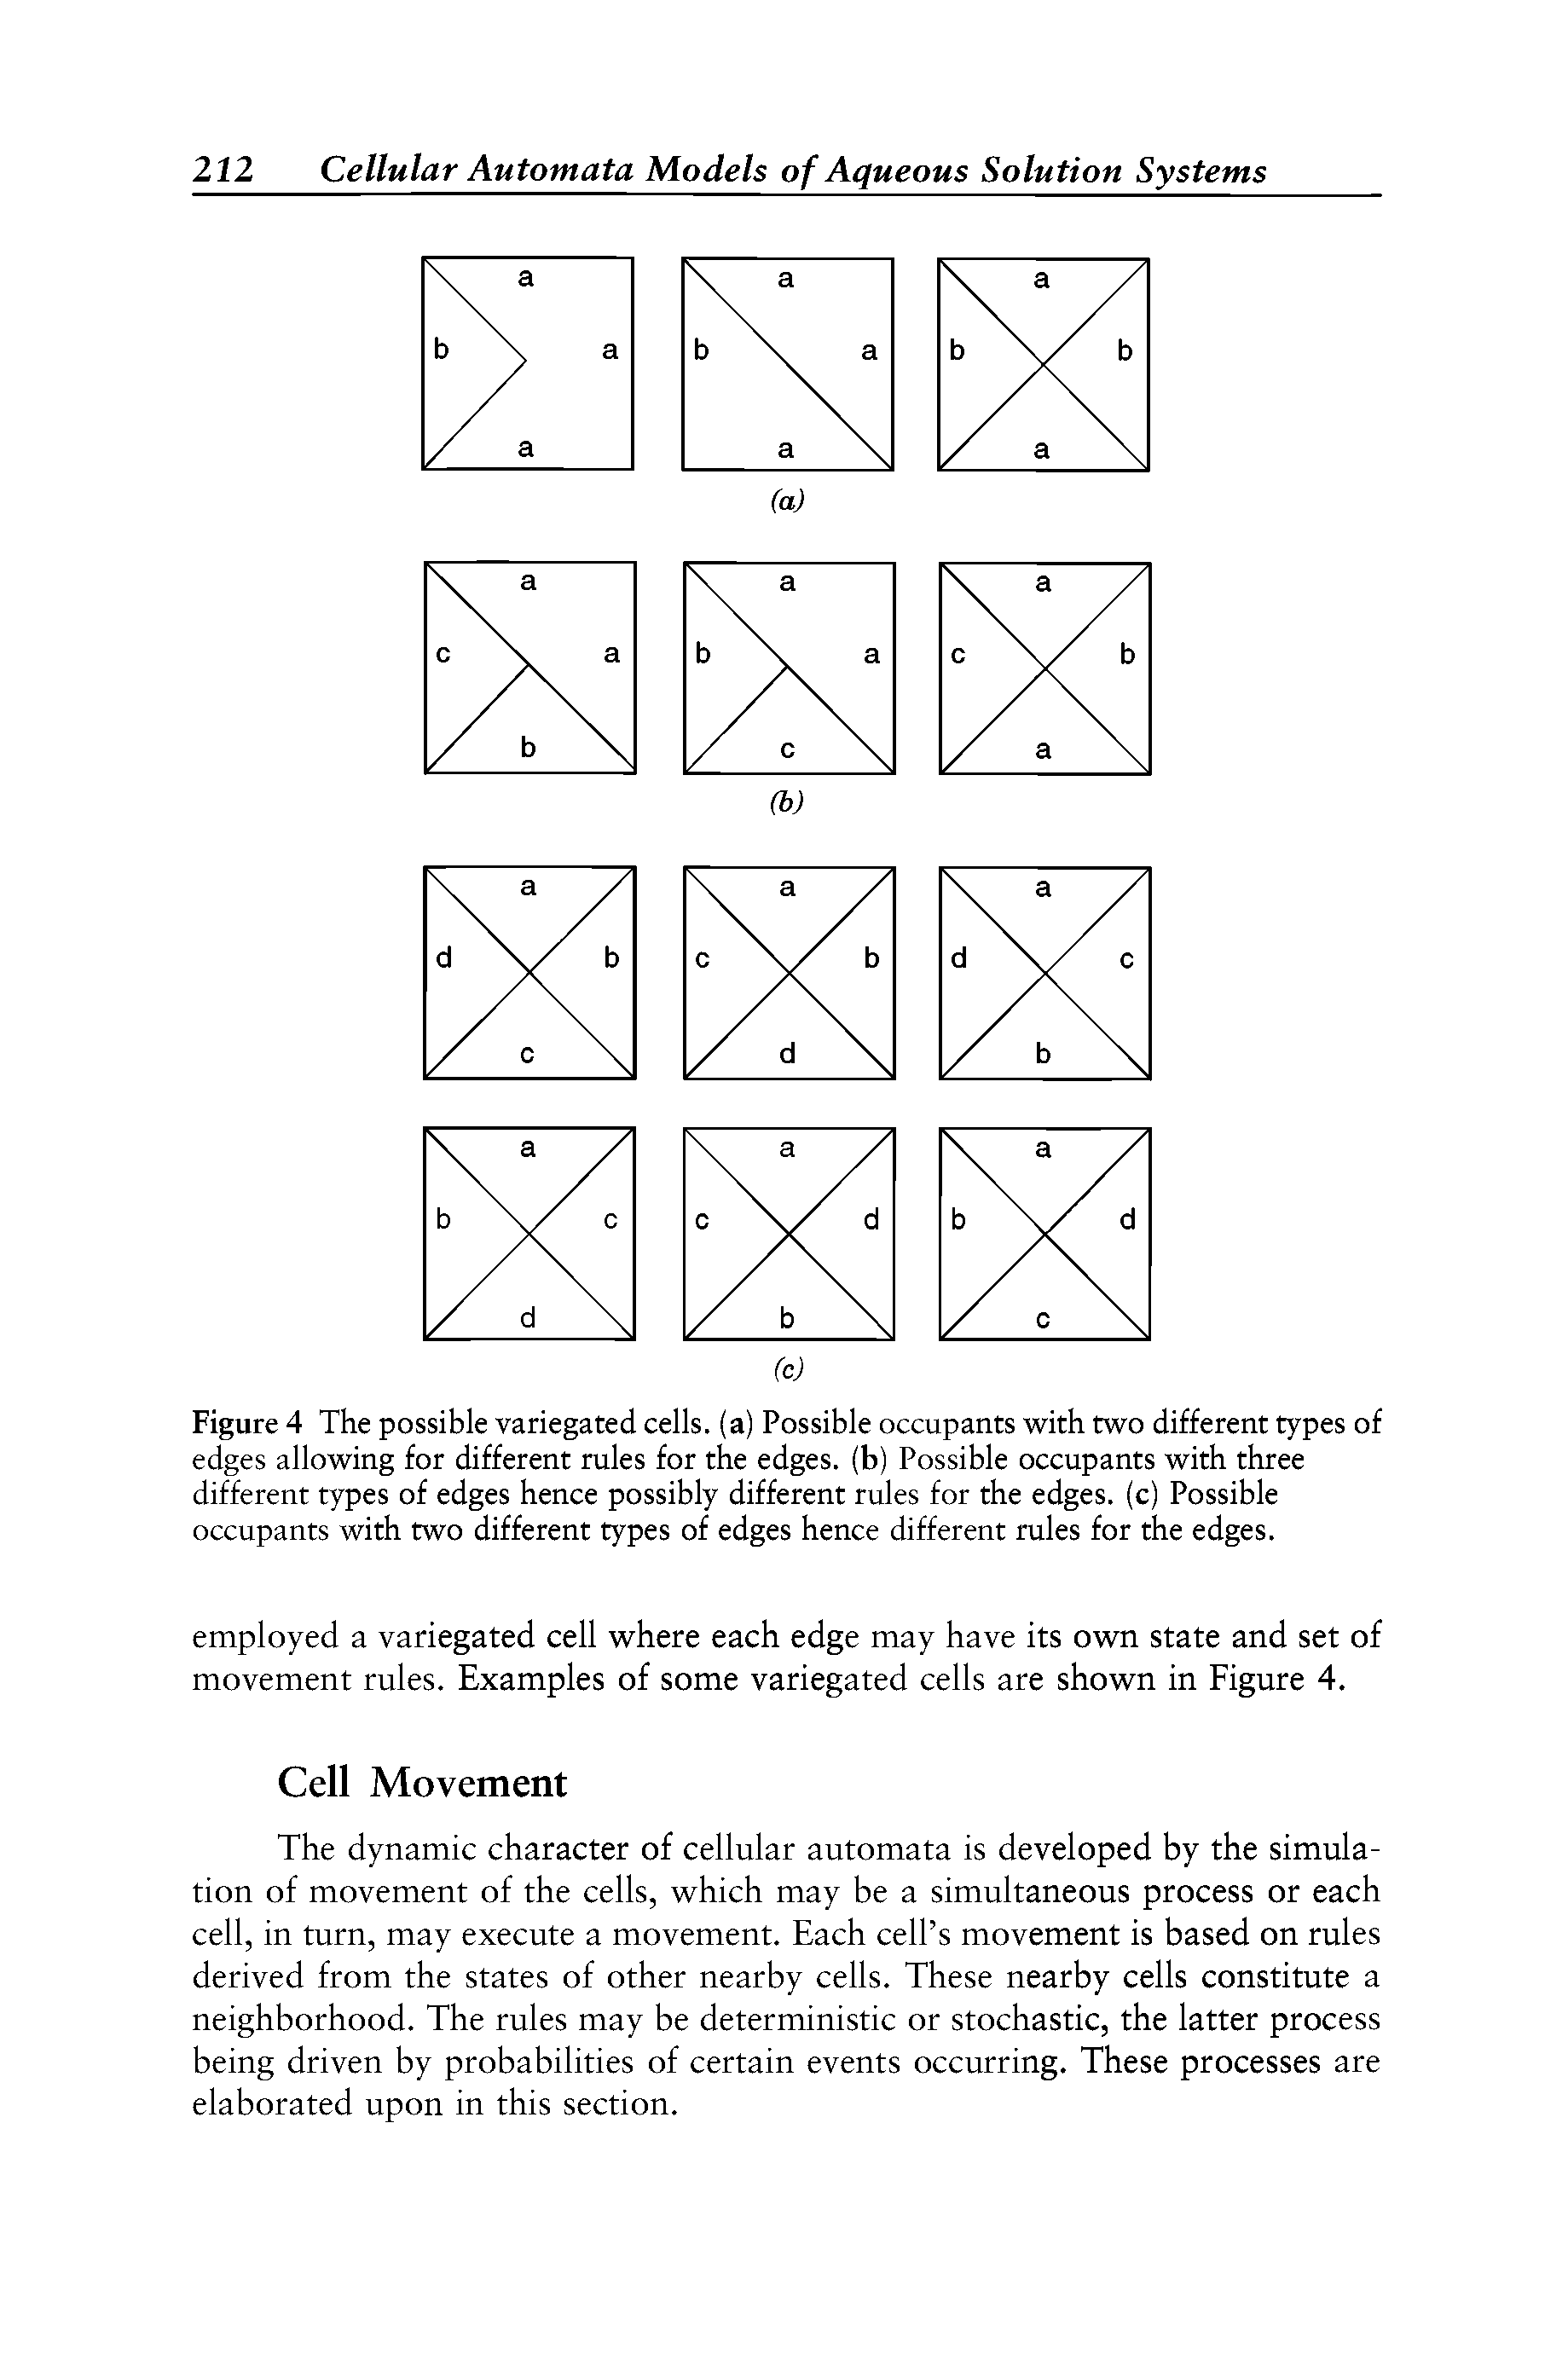 Figure 4 The possible variegated cells, (a) Possible occupants with two different types of edges allowing for different rules for the edges, (b) Possible occupants with three different types of edges hence possibly different rules for the edges, (c) Possible occupants with two different types of edges hence different rules for the edges.